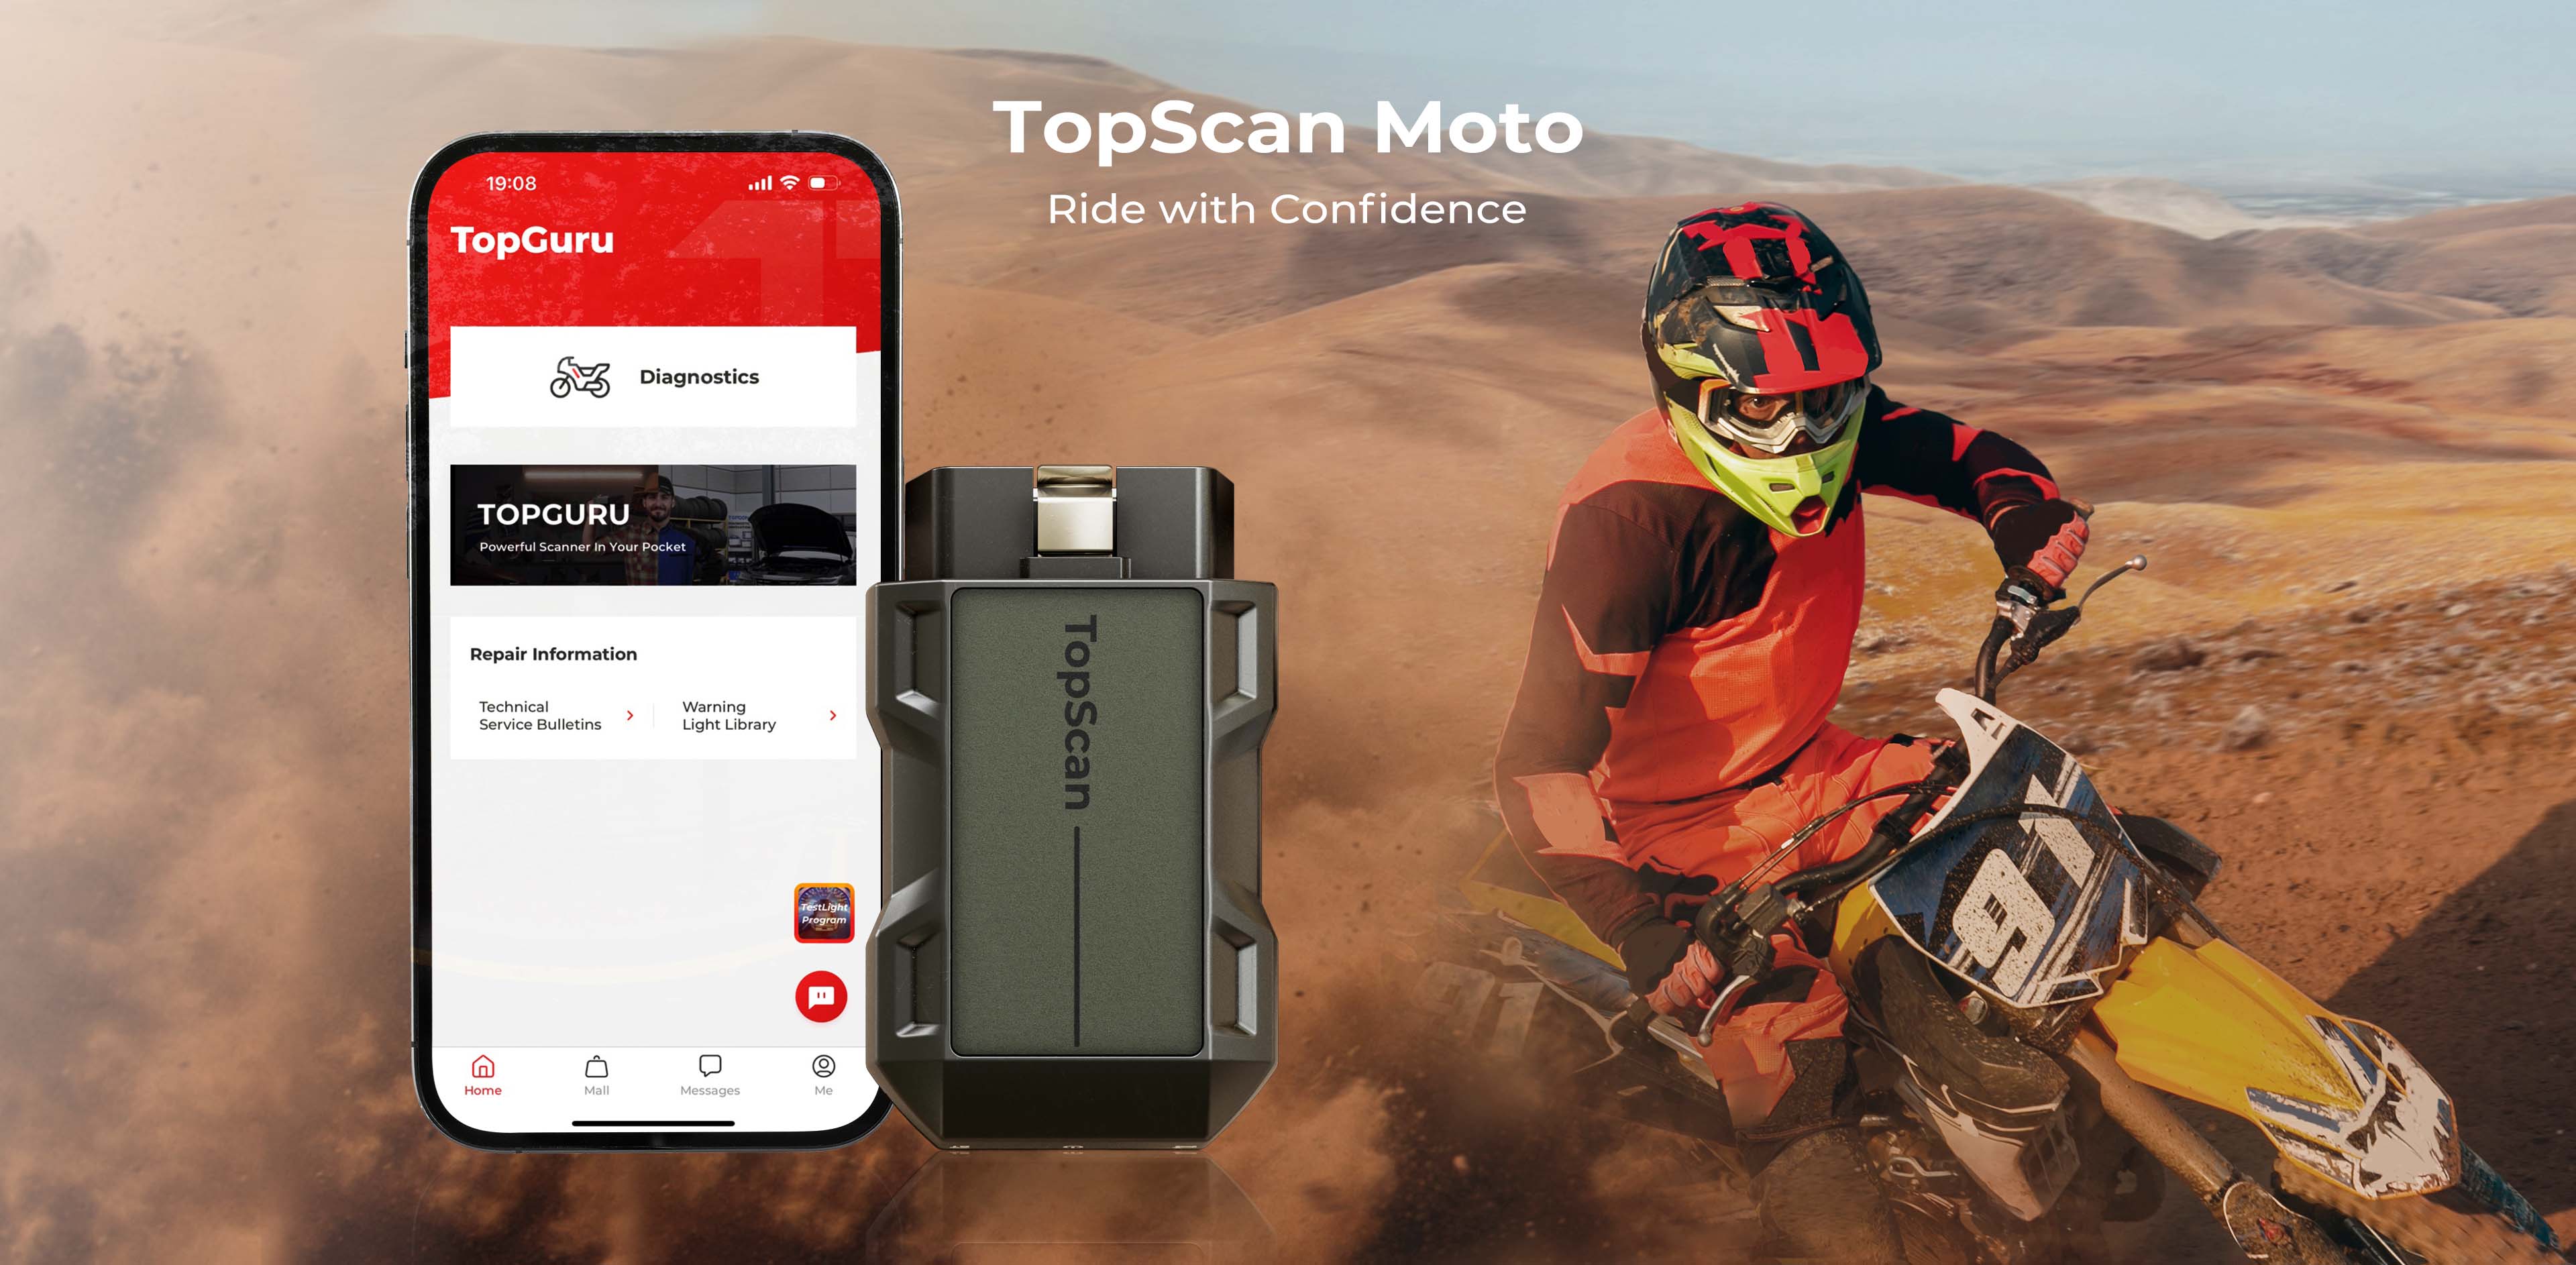 TopScan Moto-Ride with Confidence